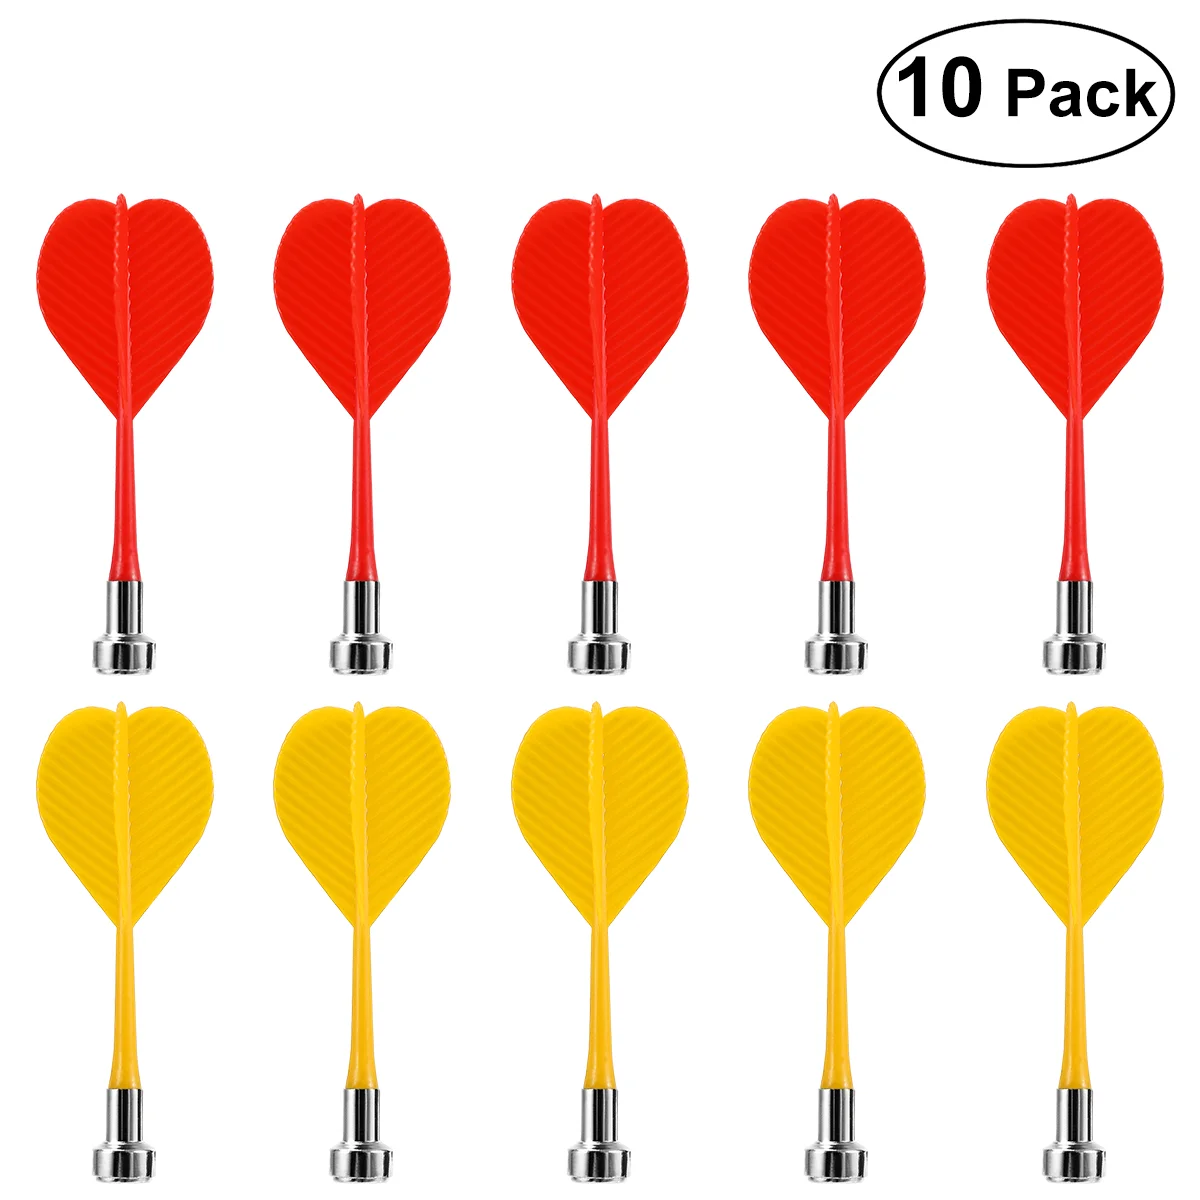 NUOLUX 10pcs Replacement Durable Safe Plastic Wing Magnetic Darts Bullseye Game Toys (Red & Yellow) 10pcs lot hcnw4502 500e hcnw4503 300e hcnw4503 500e hcnw4504 500e【optoiso 5kv trans 8dip gull wing】new